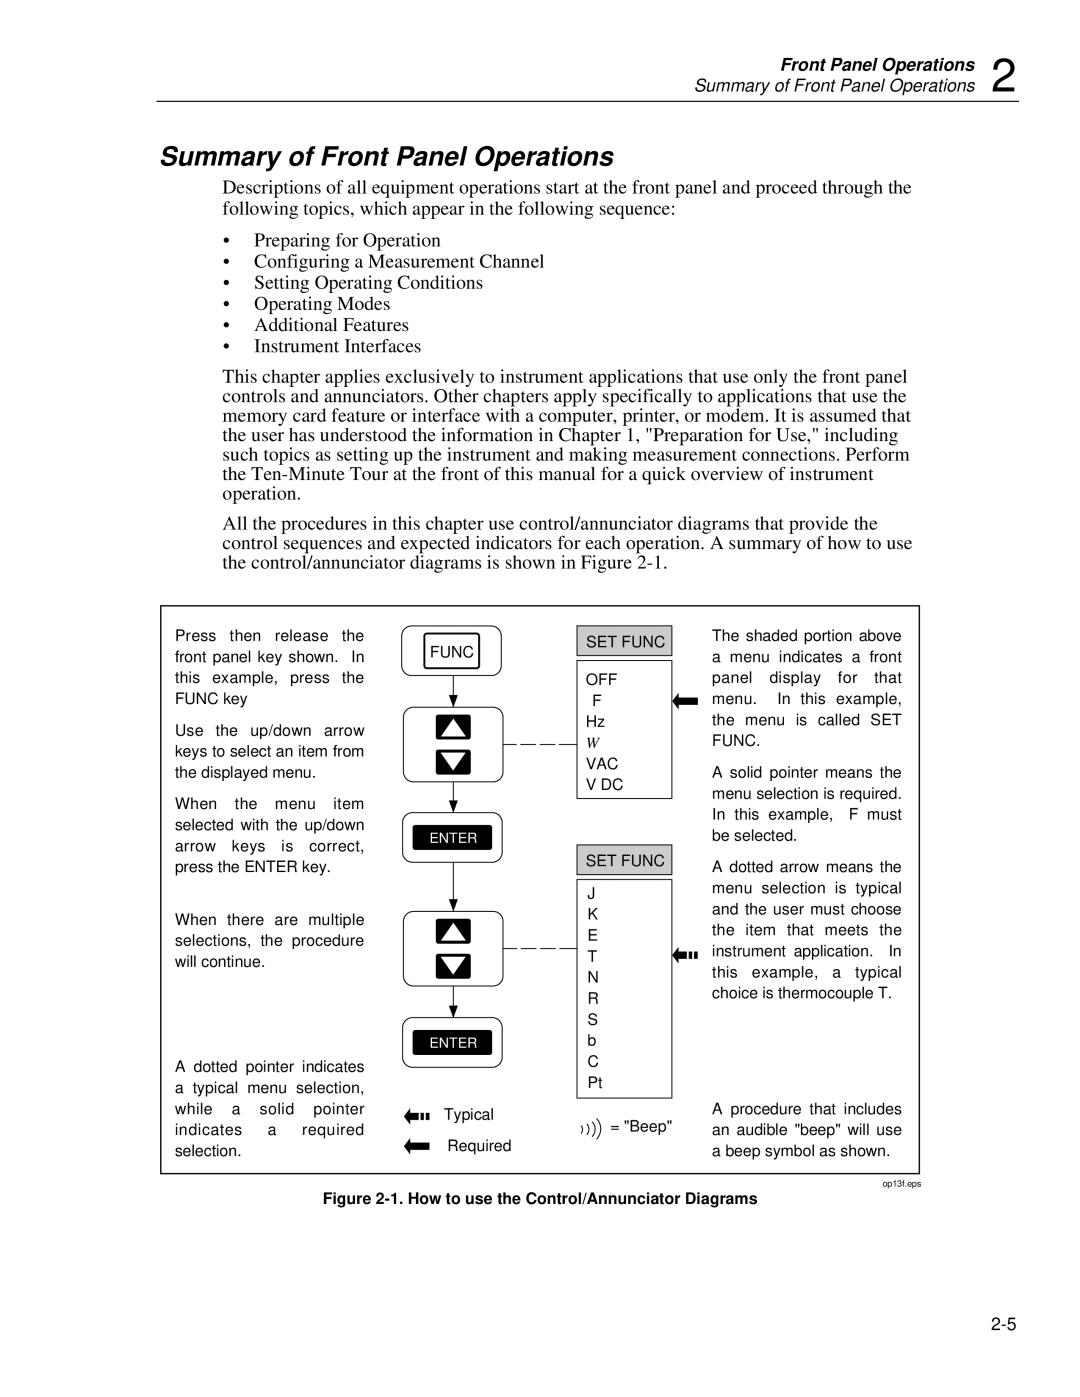 Fluke 2635A user manual Summary of Front Panel Operations, How to use the Control/Annunciator Diagrams 